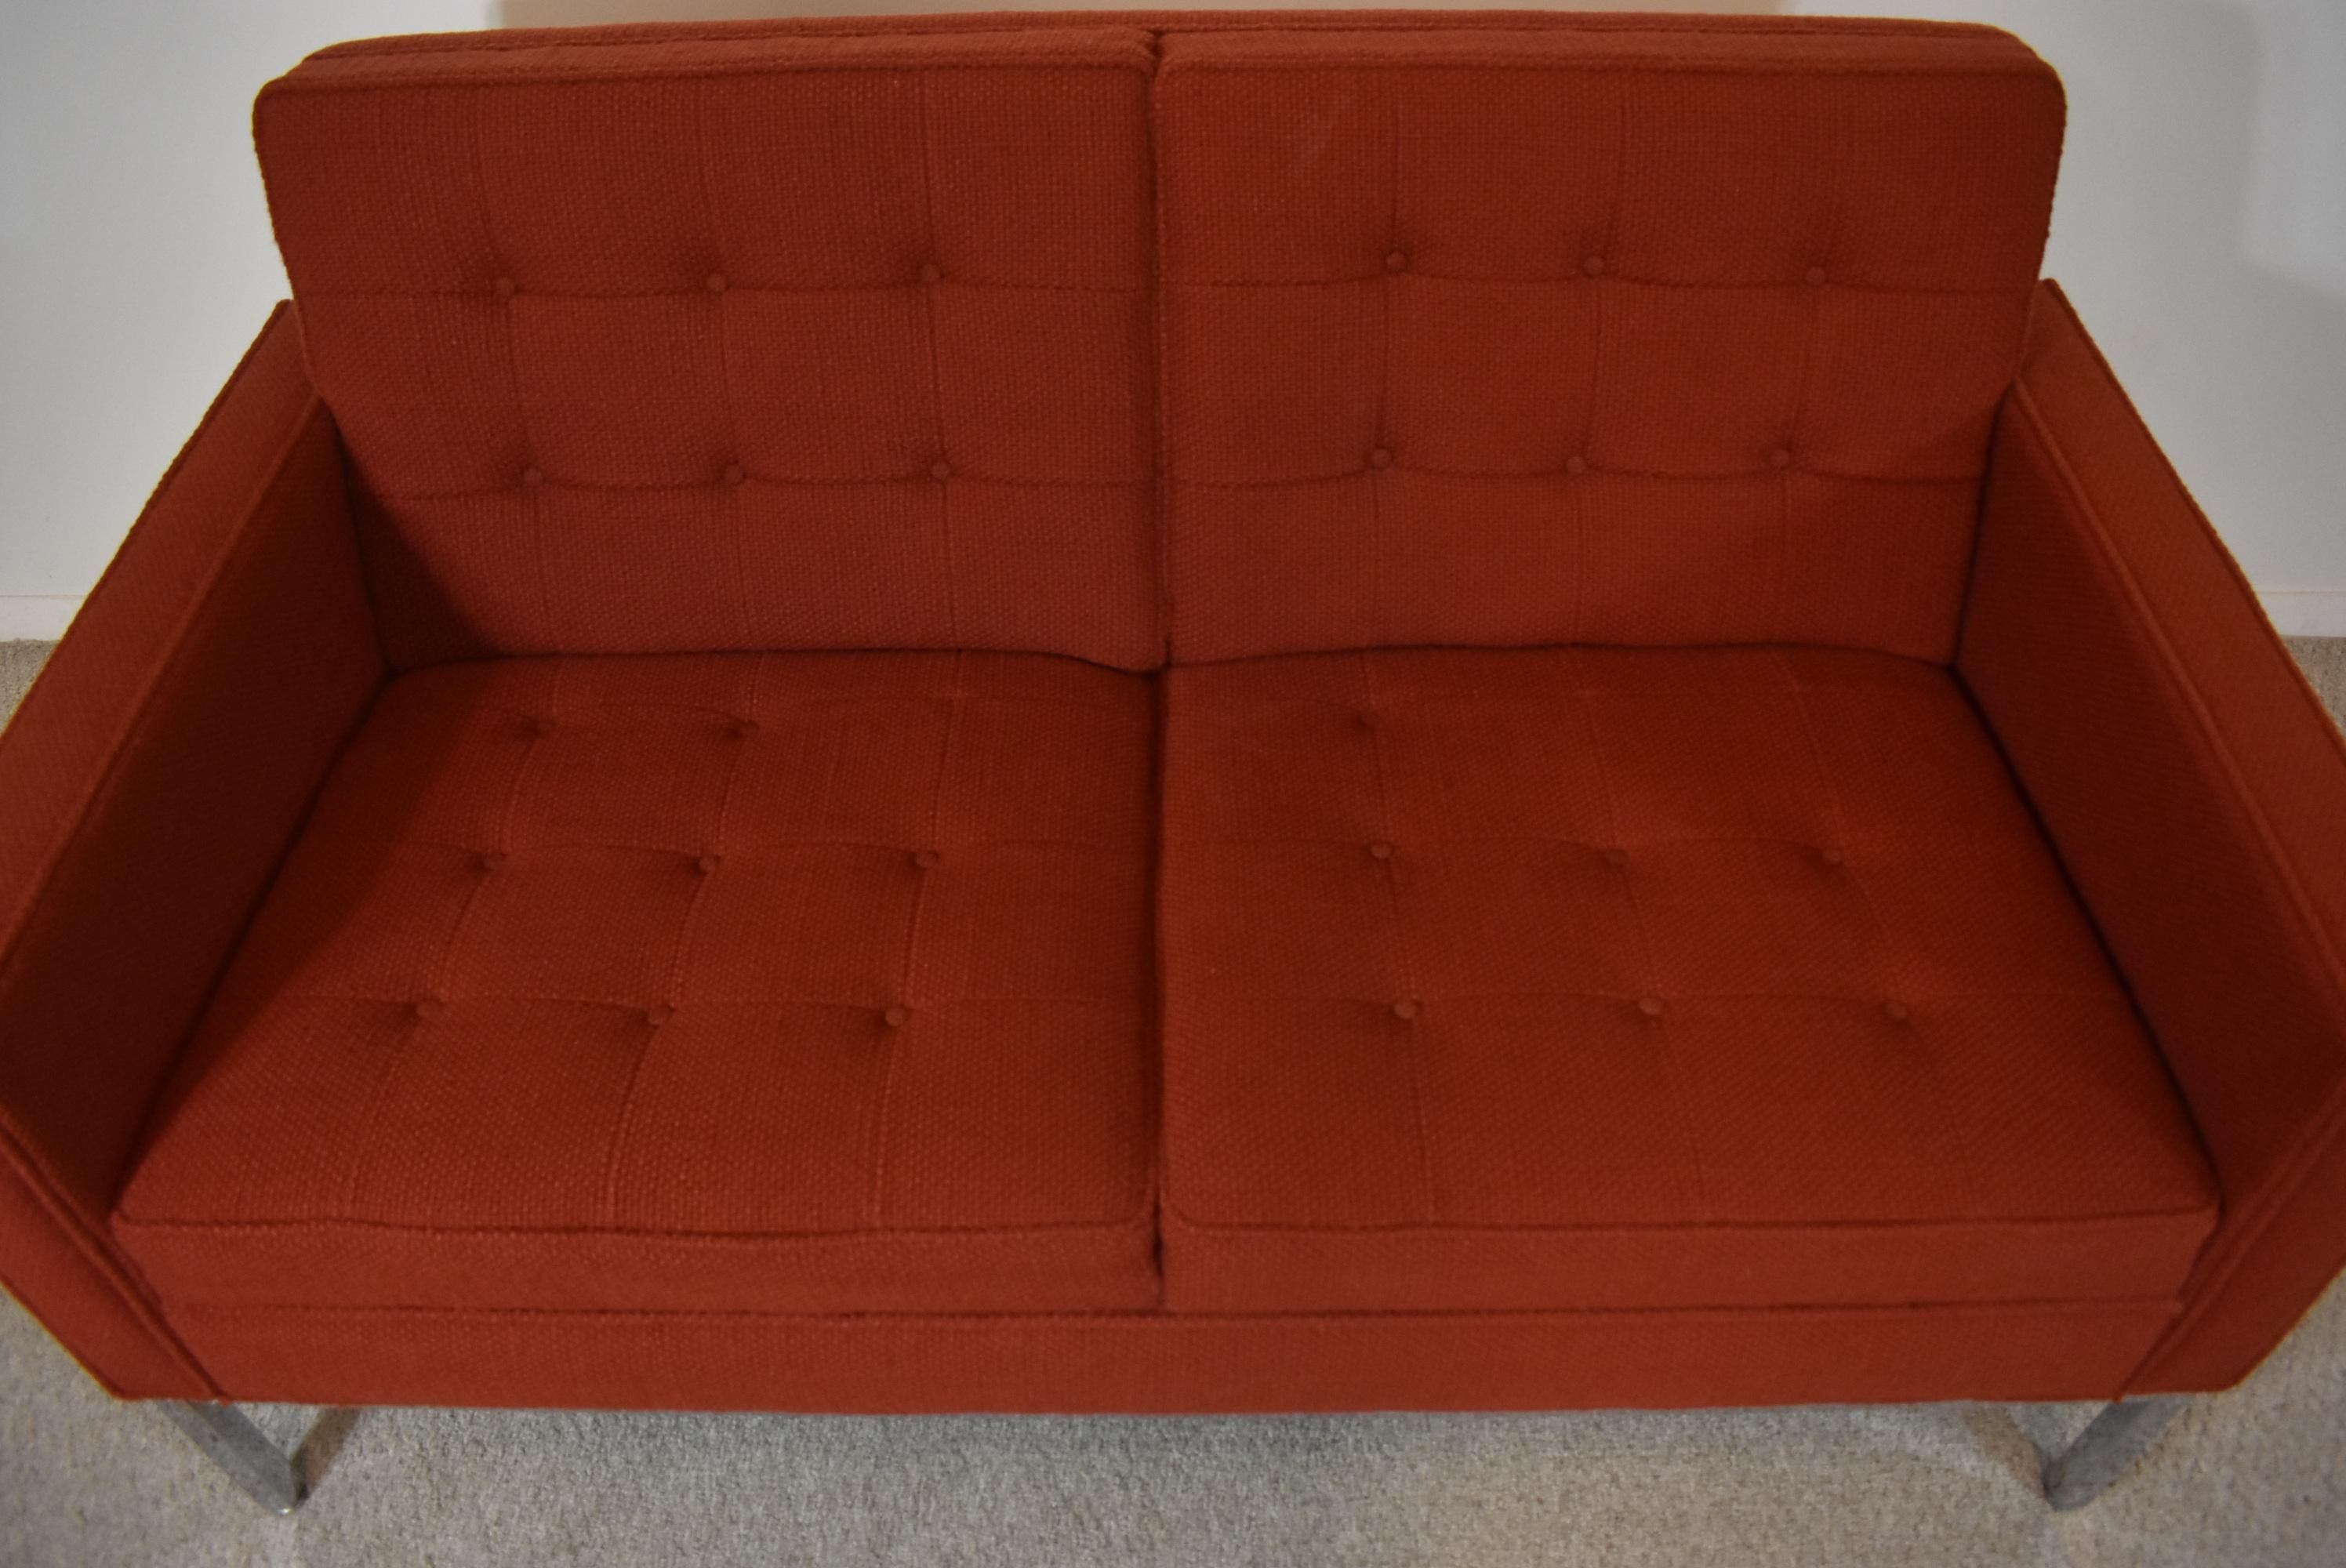 Unique Knoll 2-seat loveseat with original wool upholstery and chrome legs in excellent vintage condition. Very solid and heavy. No rust on the legs, there are 3 buttons missing. 55 1/2